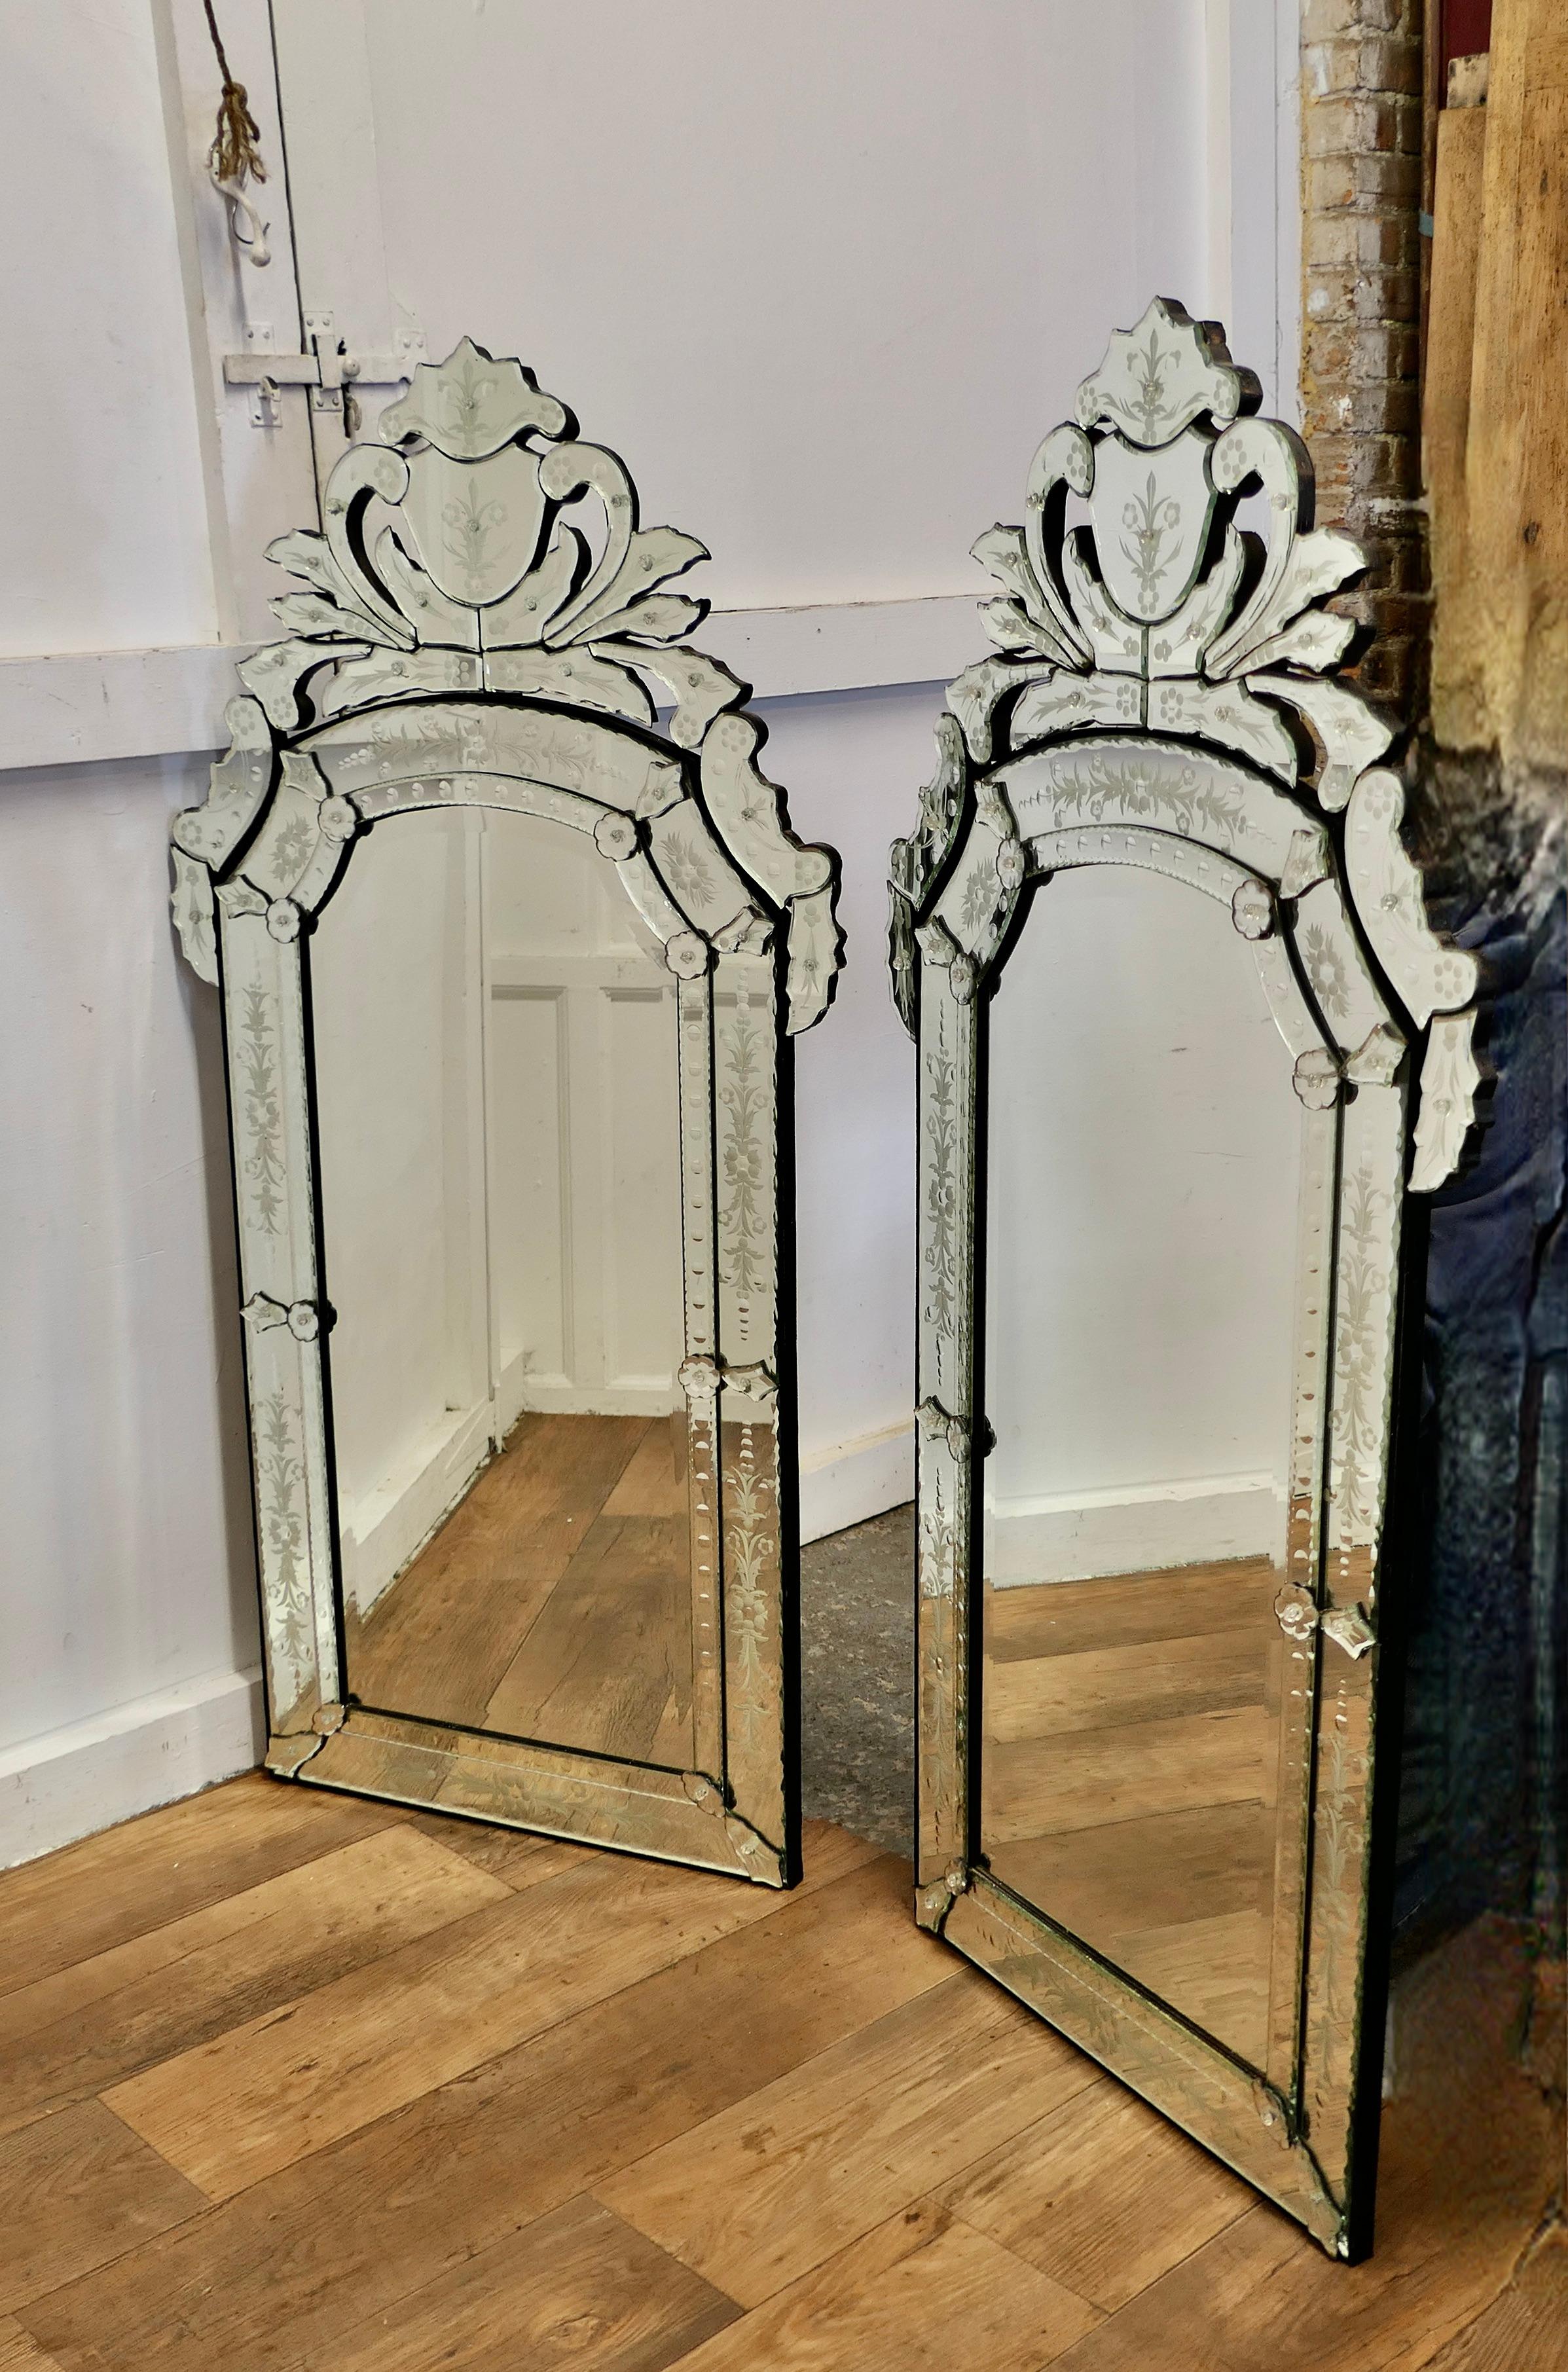 A Superb Pair of Large Venetian Pier Mirrors  These are  most outstanding pieces 5